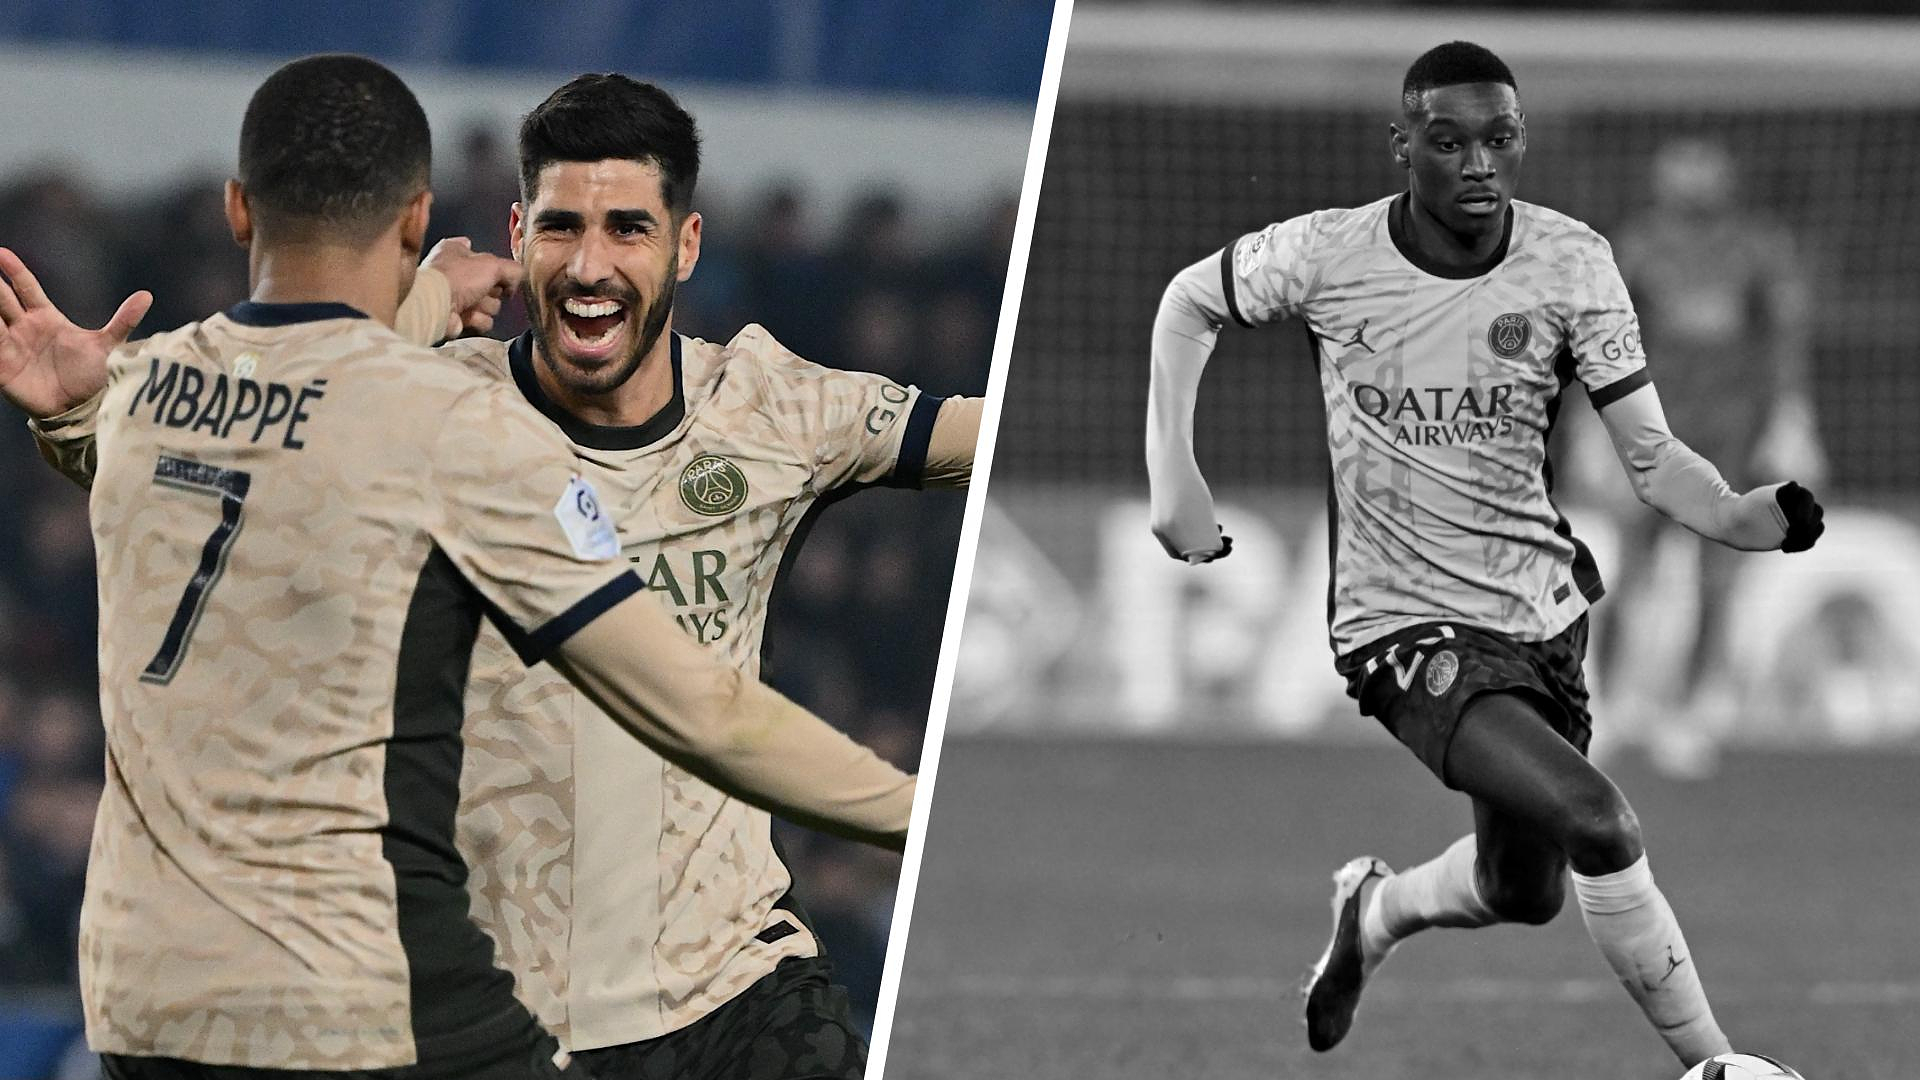 Strasbourg-PSG: the Mbappé-Asensio association convincing, Kolo Muani inside... Our tops and flops